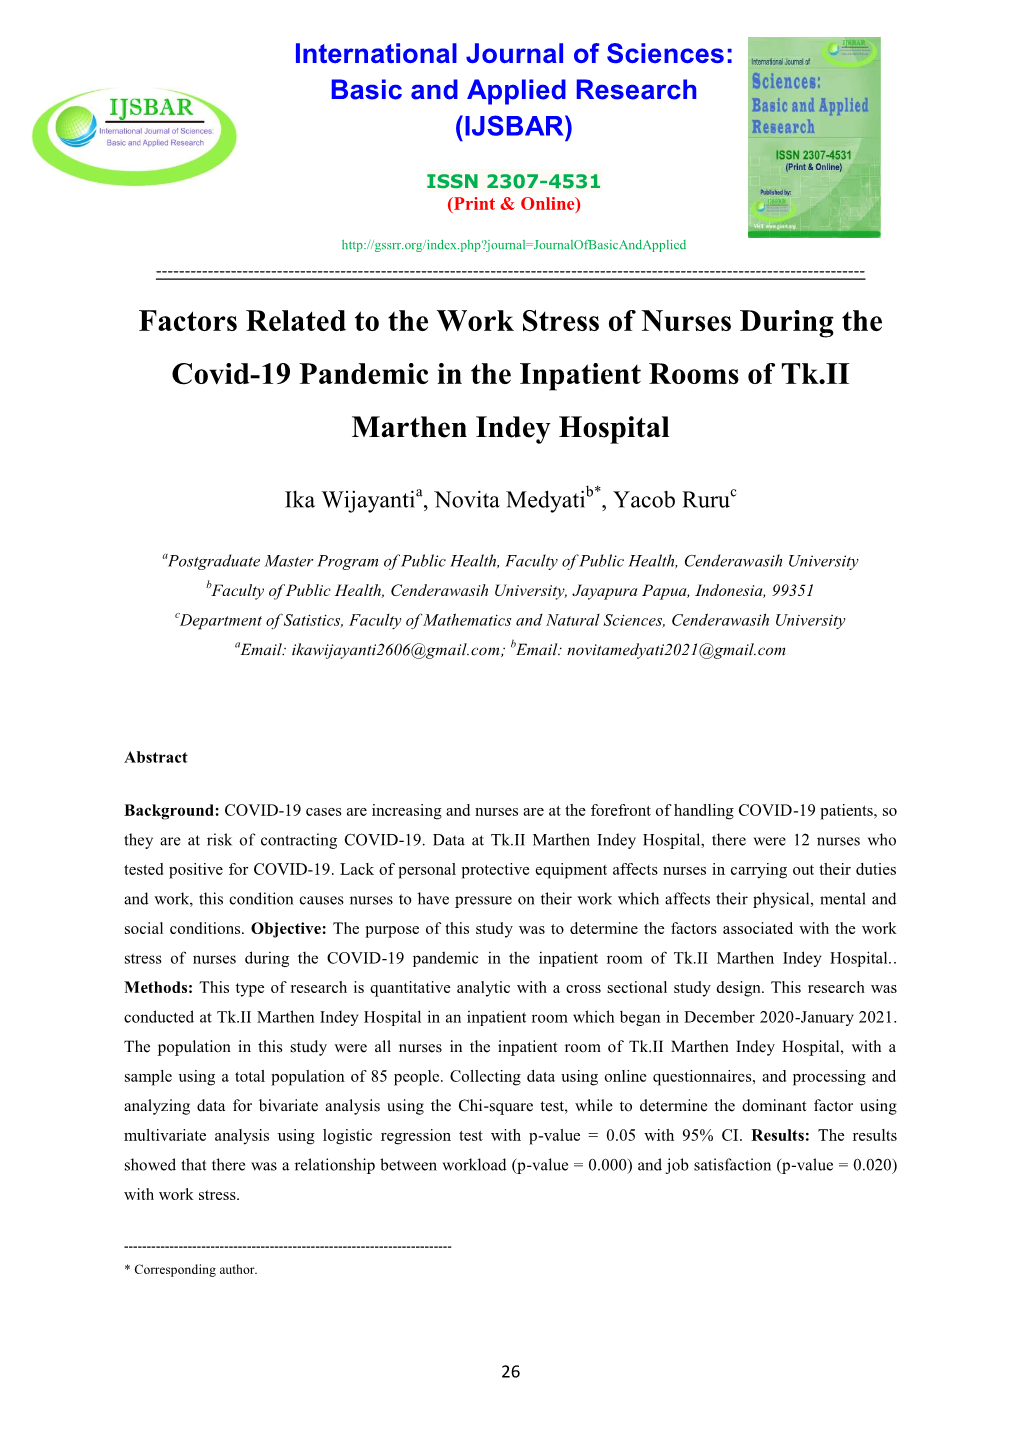 Factors Related to the Work Stress of Nurses During the Covid-19 Pandemic in the Inpatient Rooms of Tk.II Marthen Indey Hospital